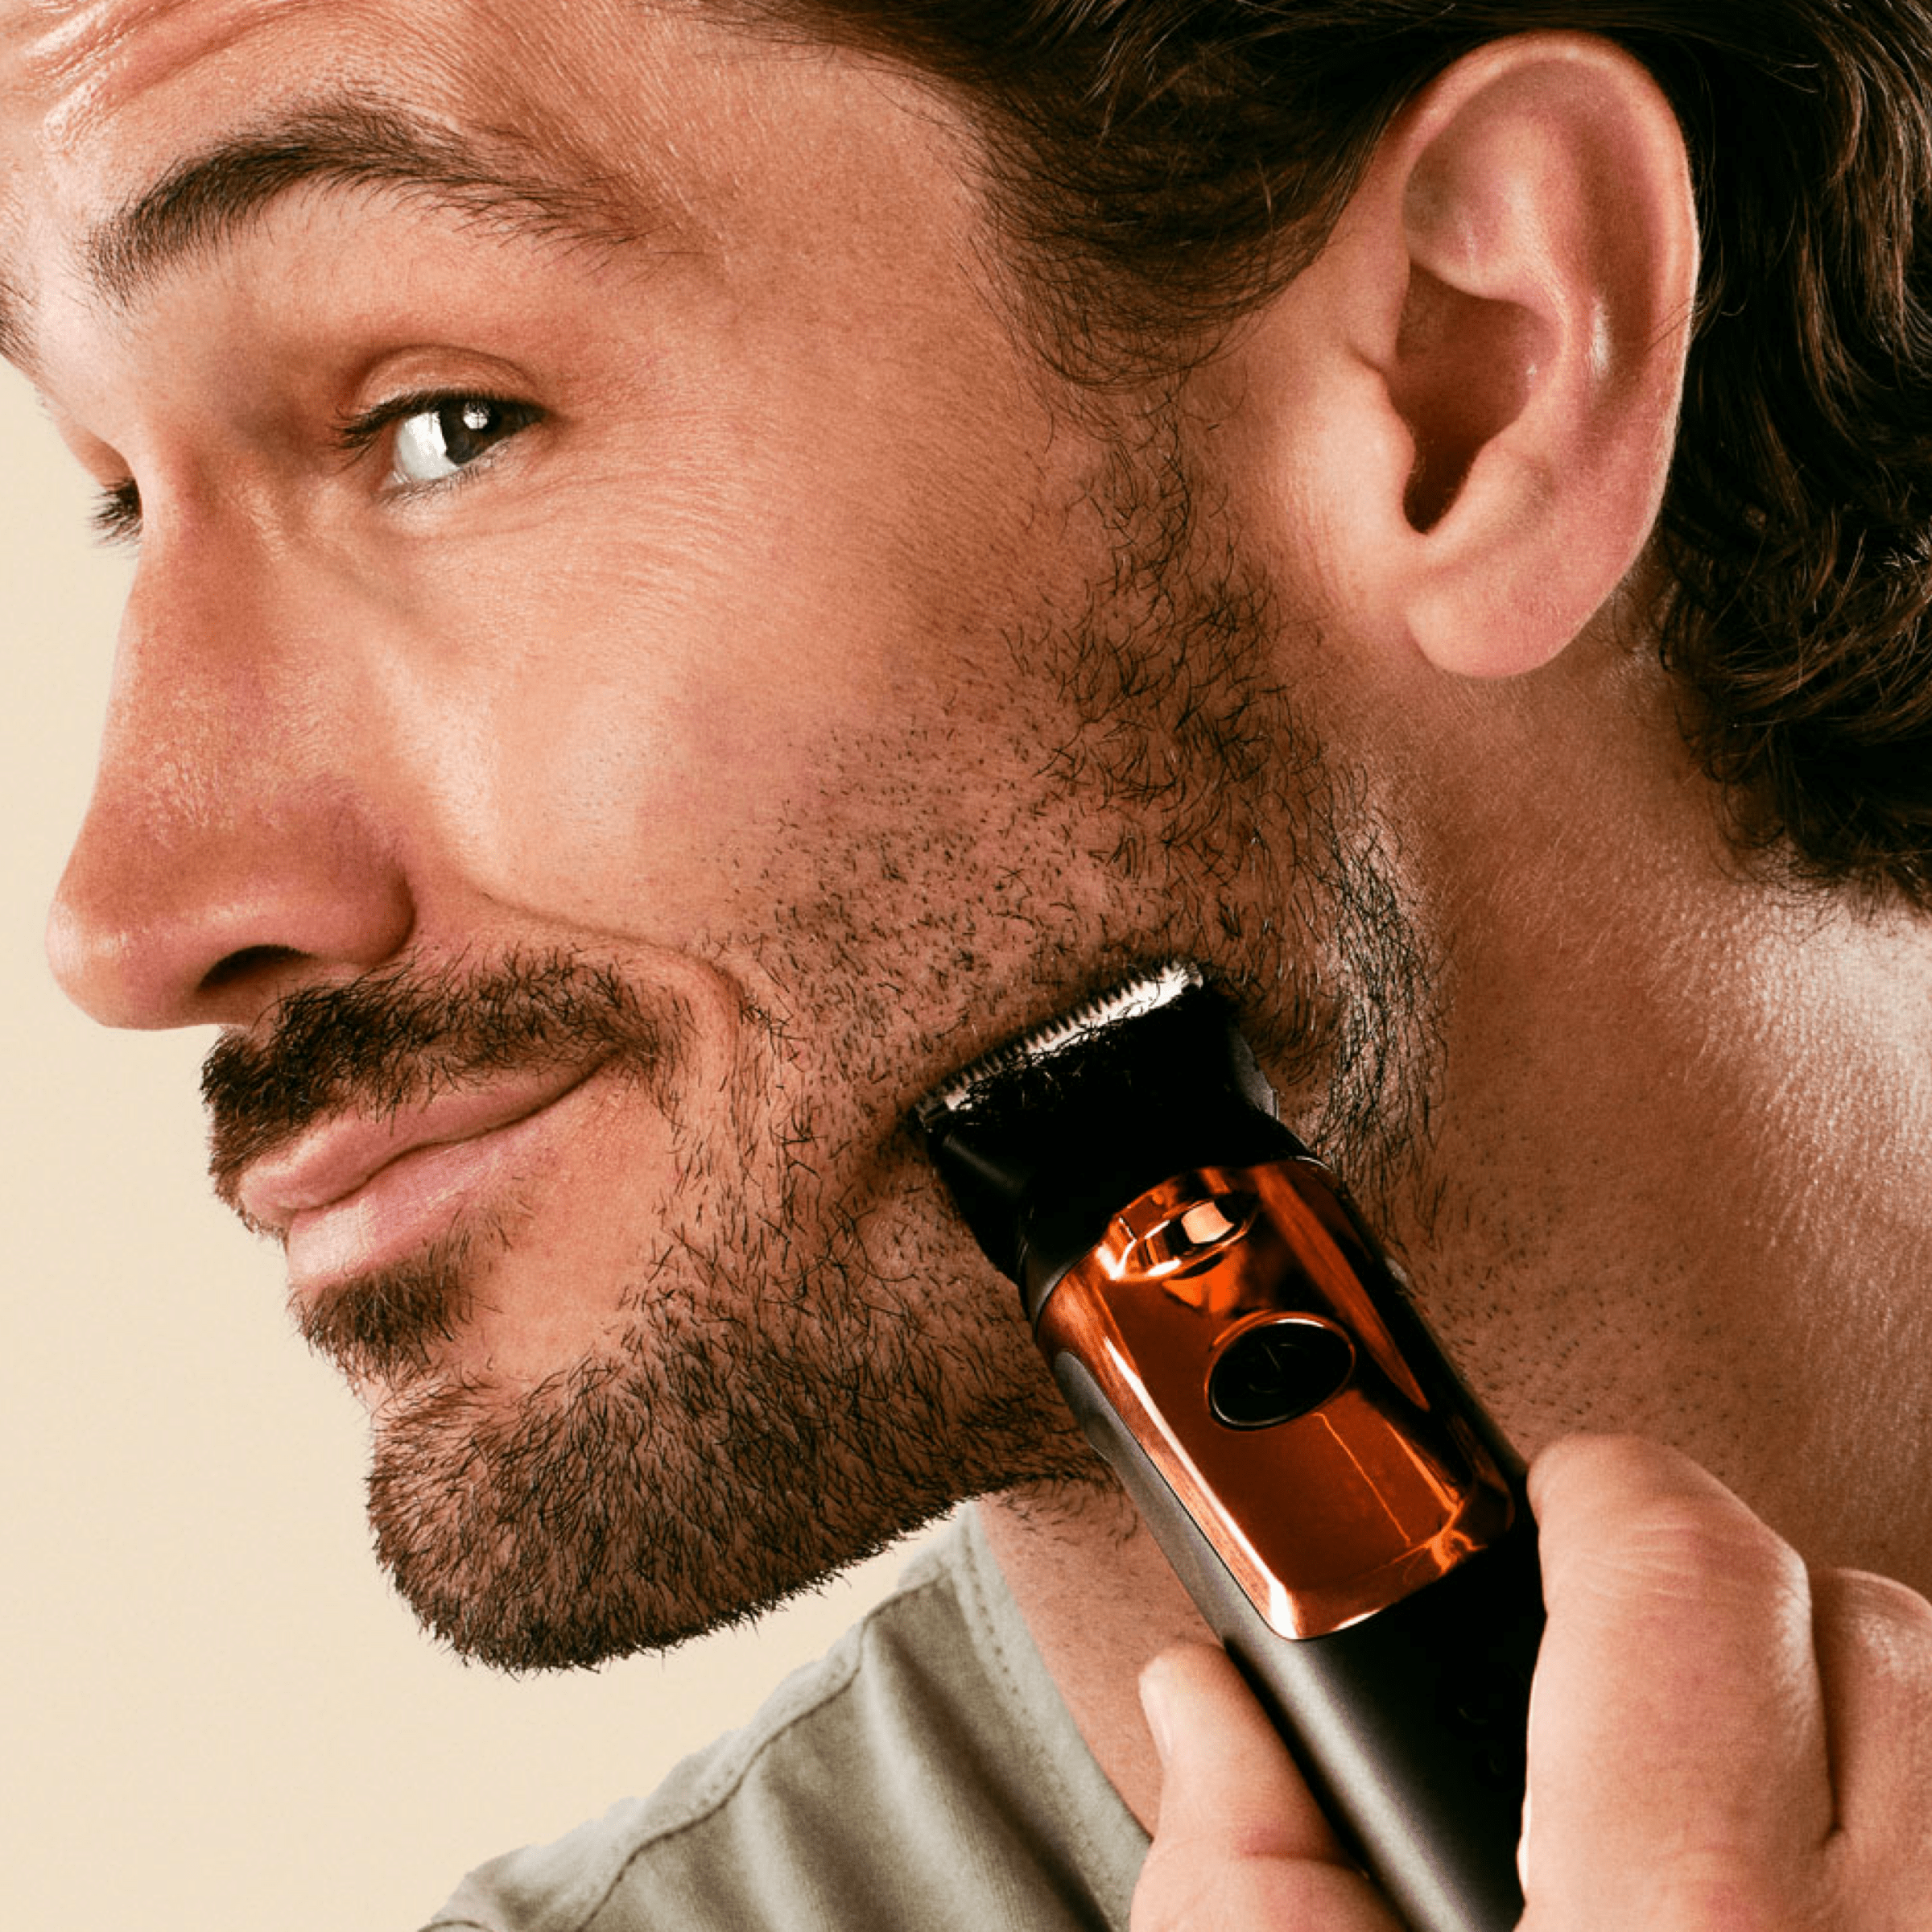 Hair Clipper Oil & Accessories, Hair Clippers & Trimmers